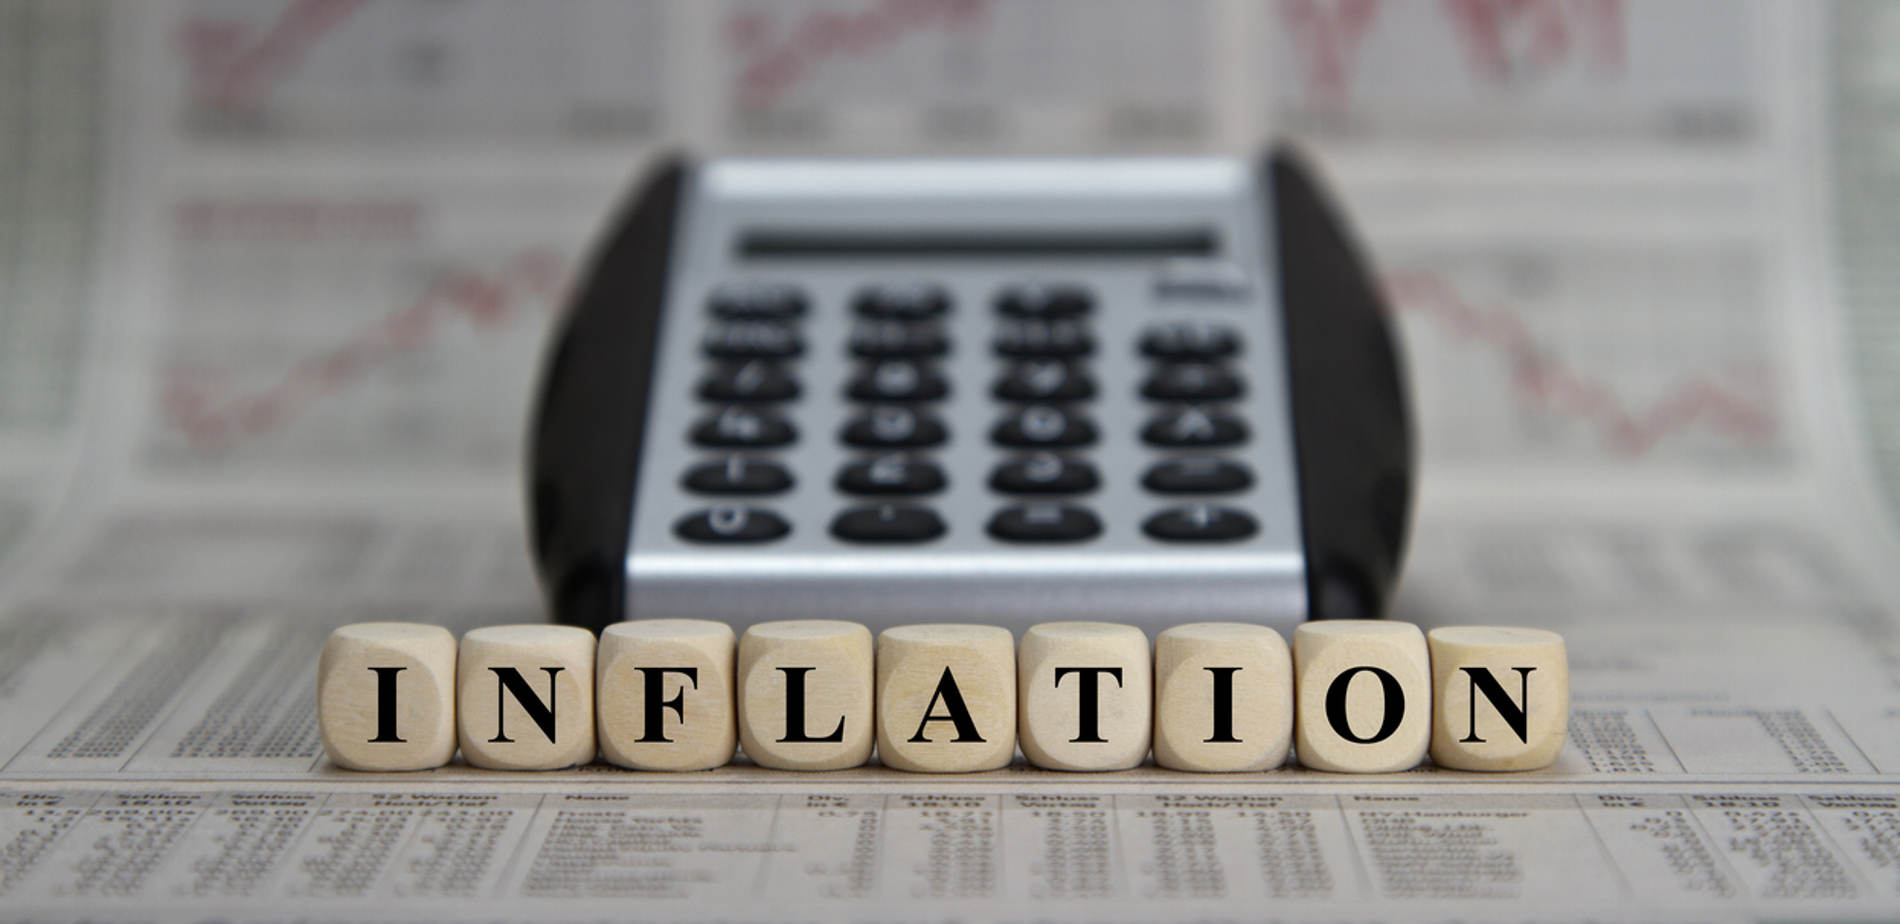 Inflation 